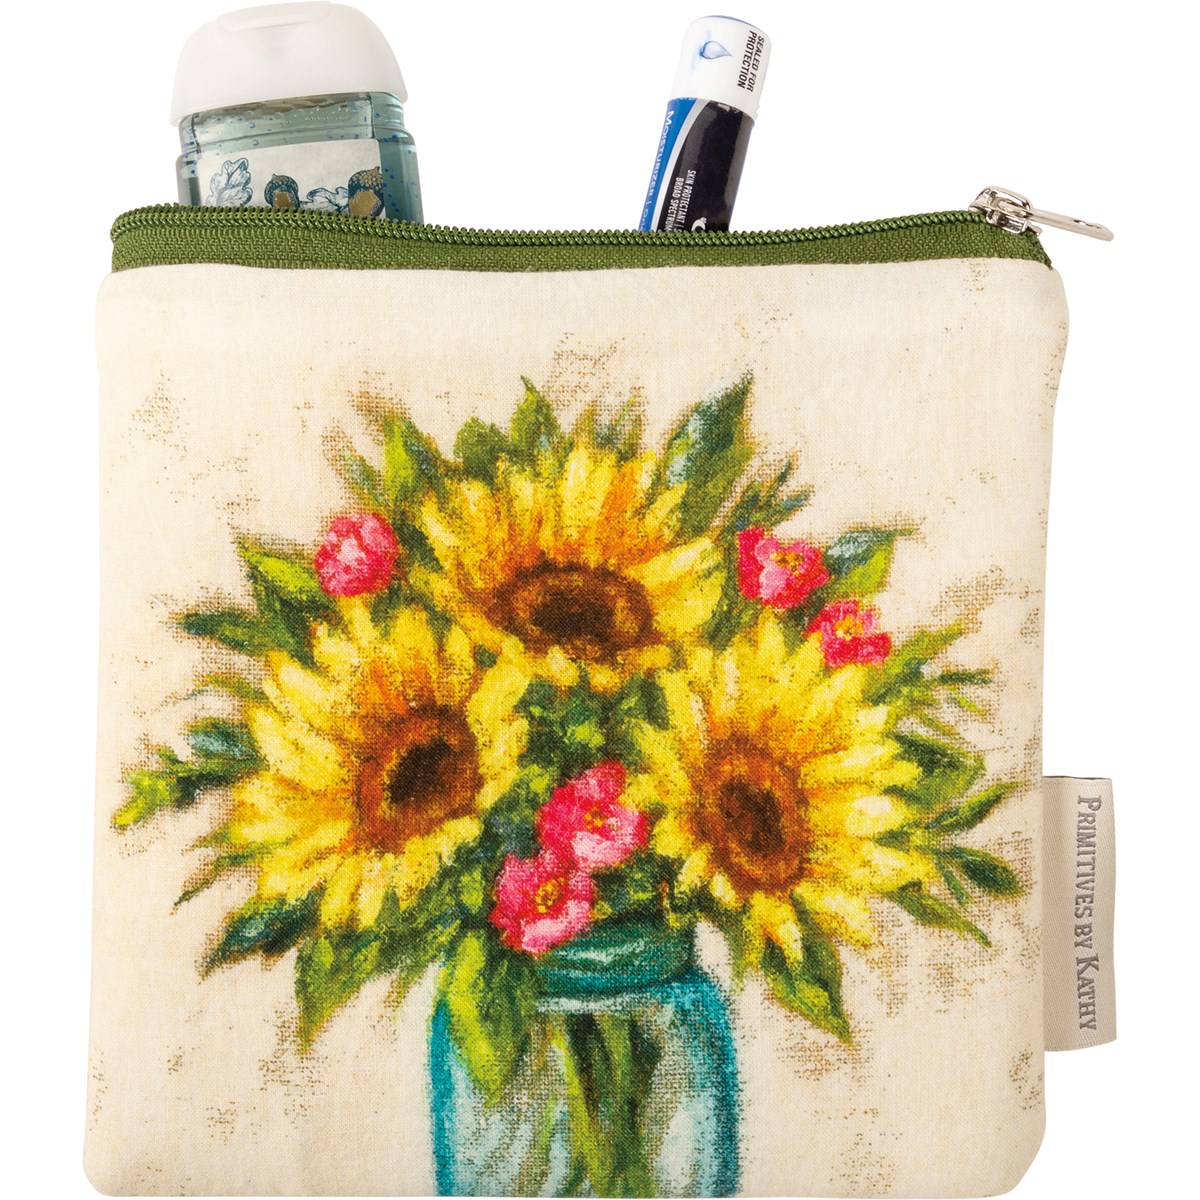 Sunflowers Everything Pouch - Cotton, Faux Leather, Metal